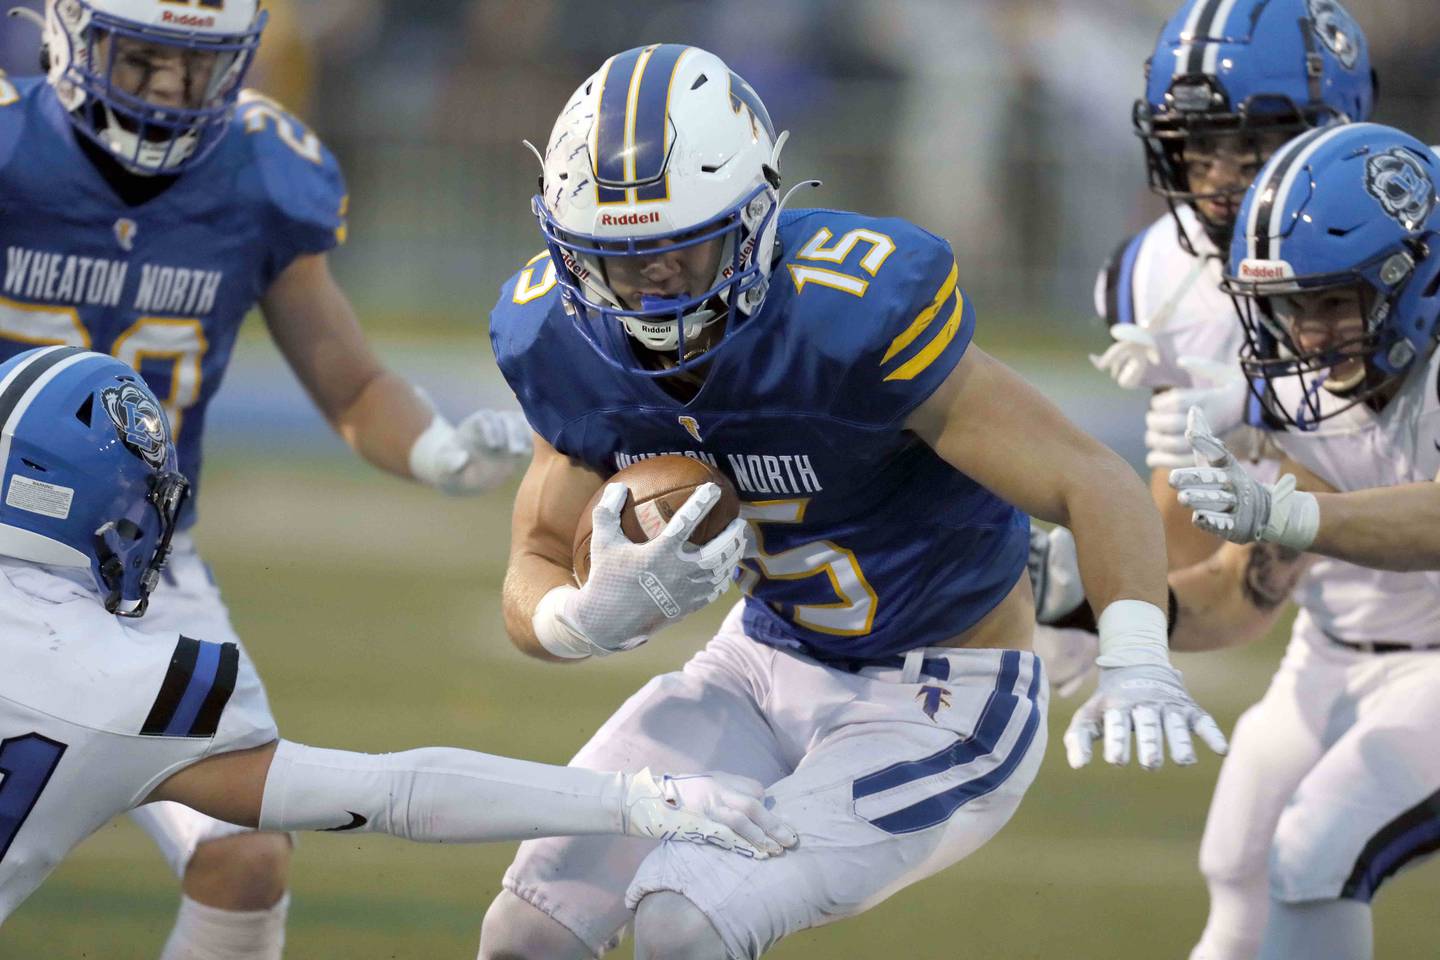 Brian Hill/bhill@dailyherald.com
Wheaton North's Karsten Libby (15) slide upfield during the second round of the IHSA playoffs Saturday November 5, 2022 in Wheaton.